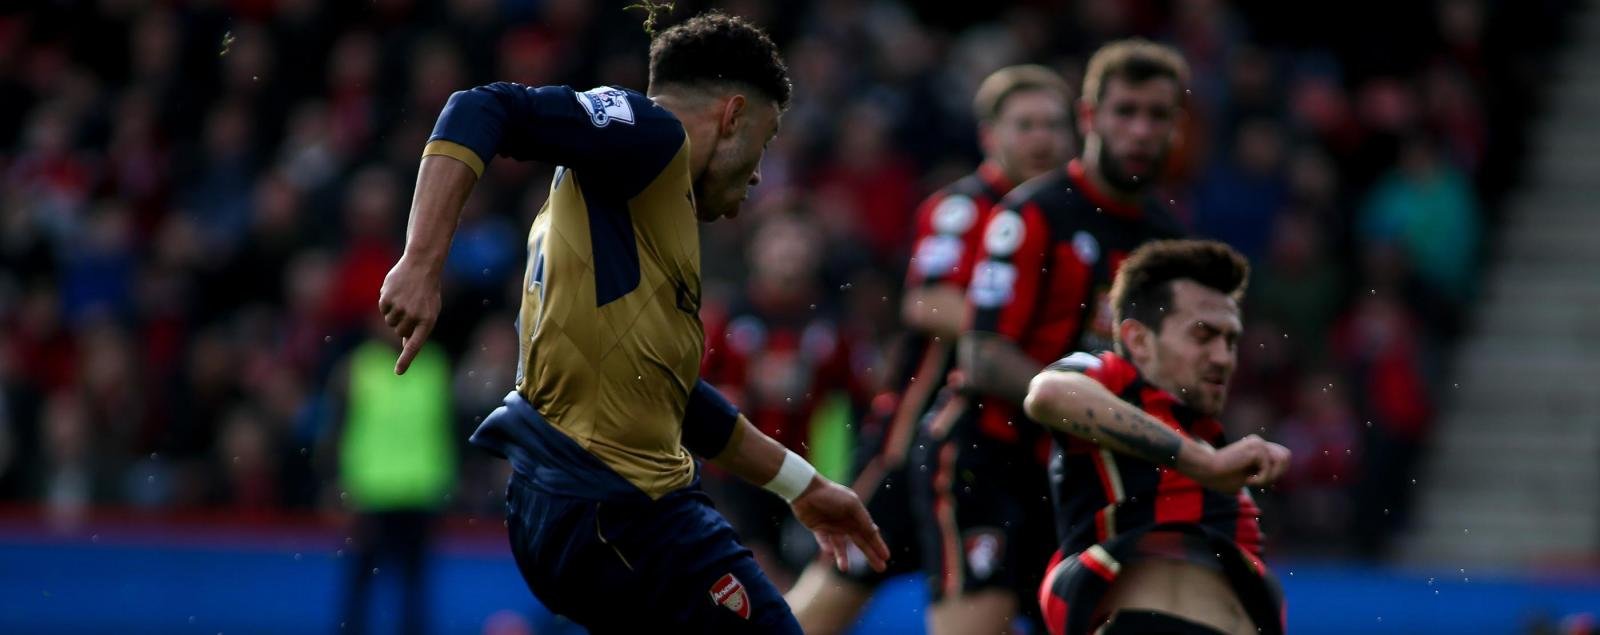 Oxlade-Chamberlain takes his chance against the Cherries